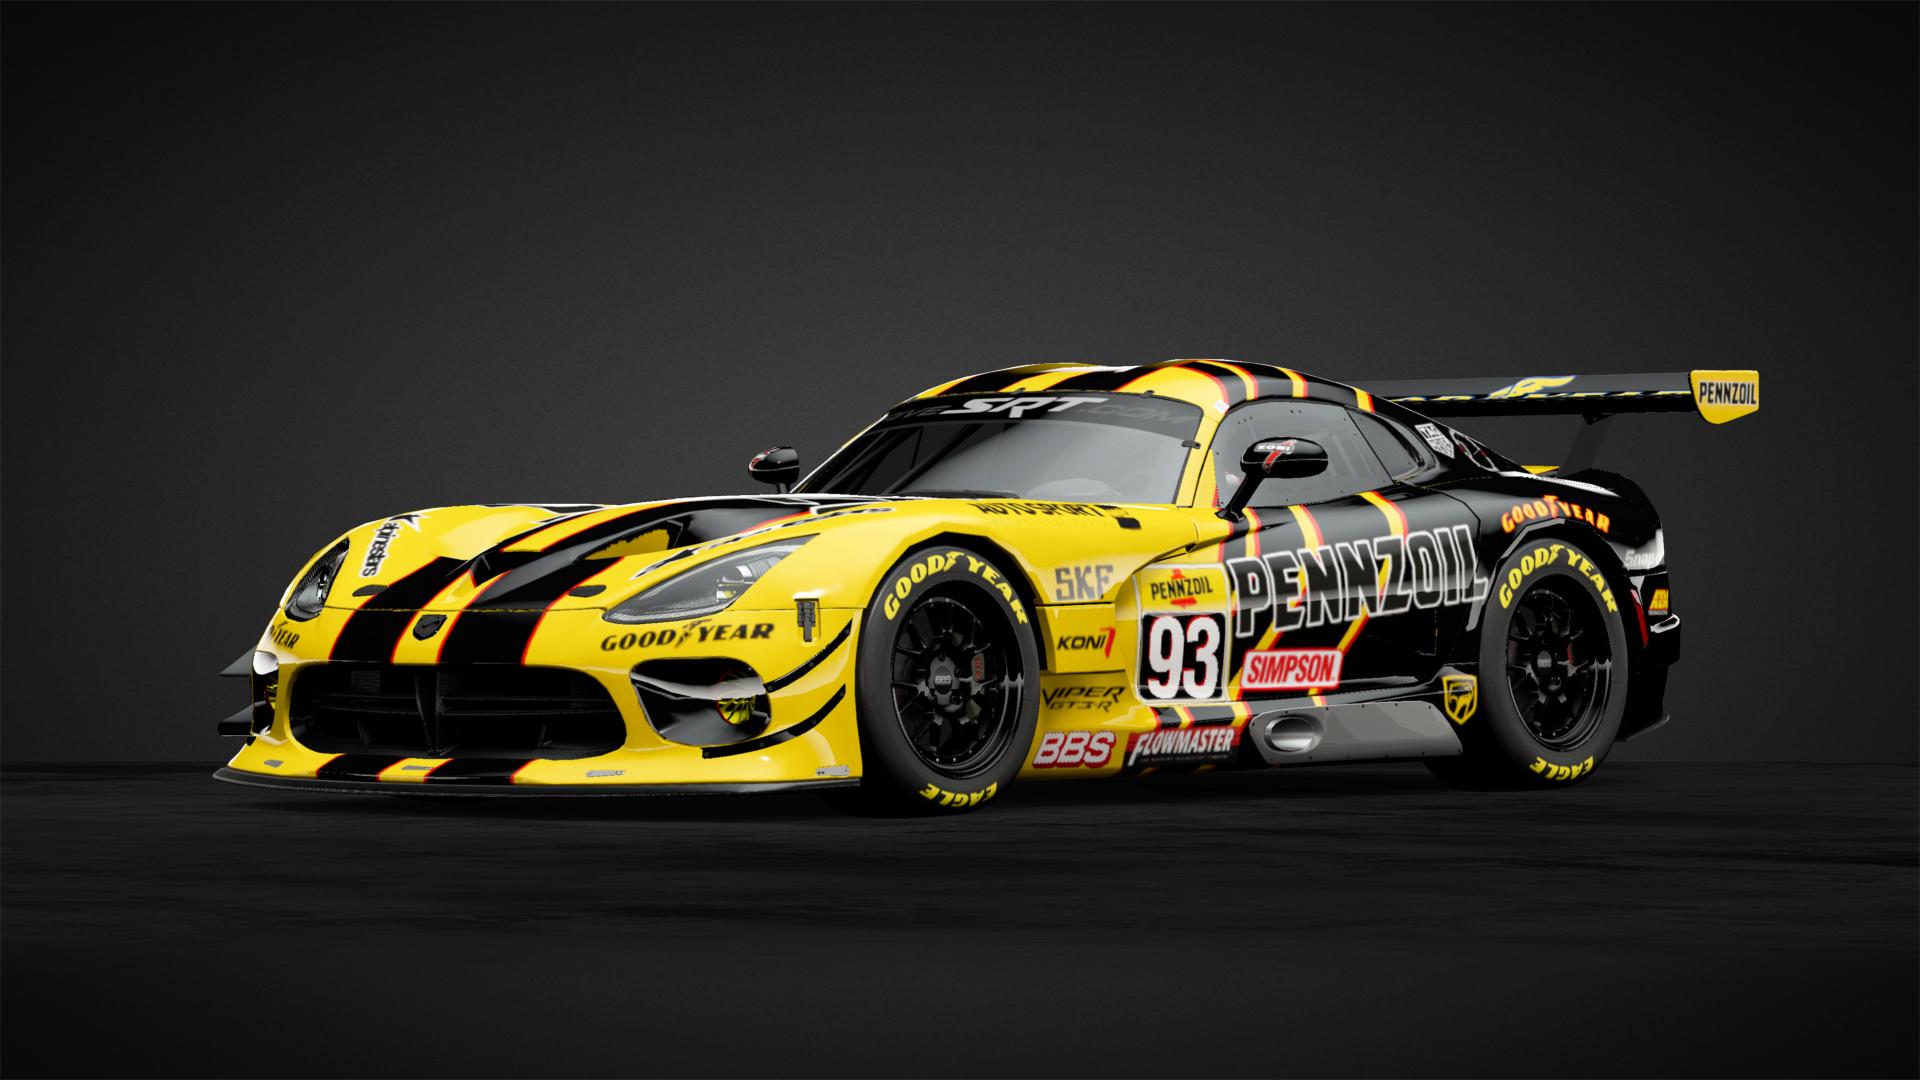 Pennzoil Racing Viper Gt3 Car Livery By Hellcat